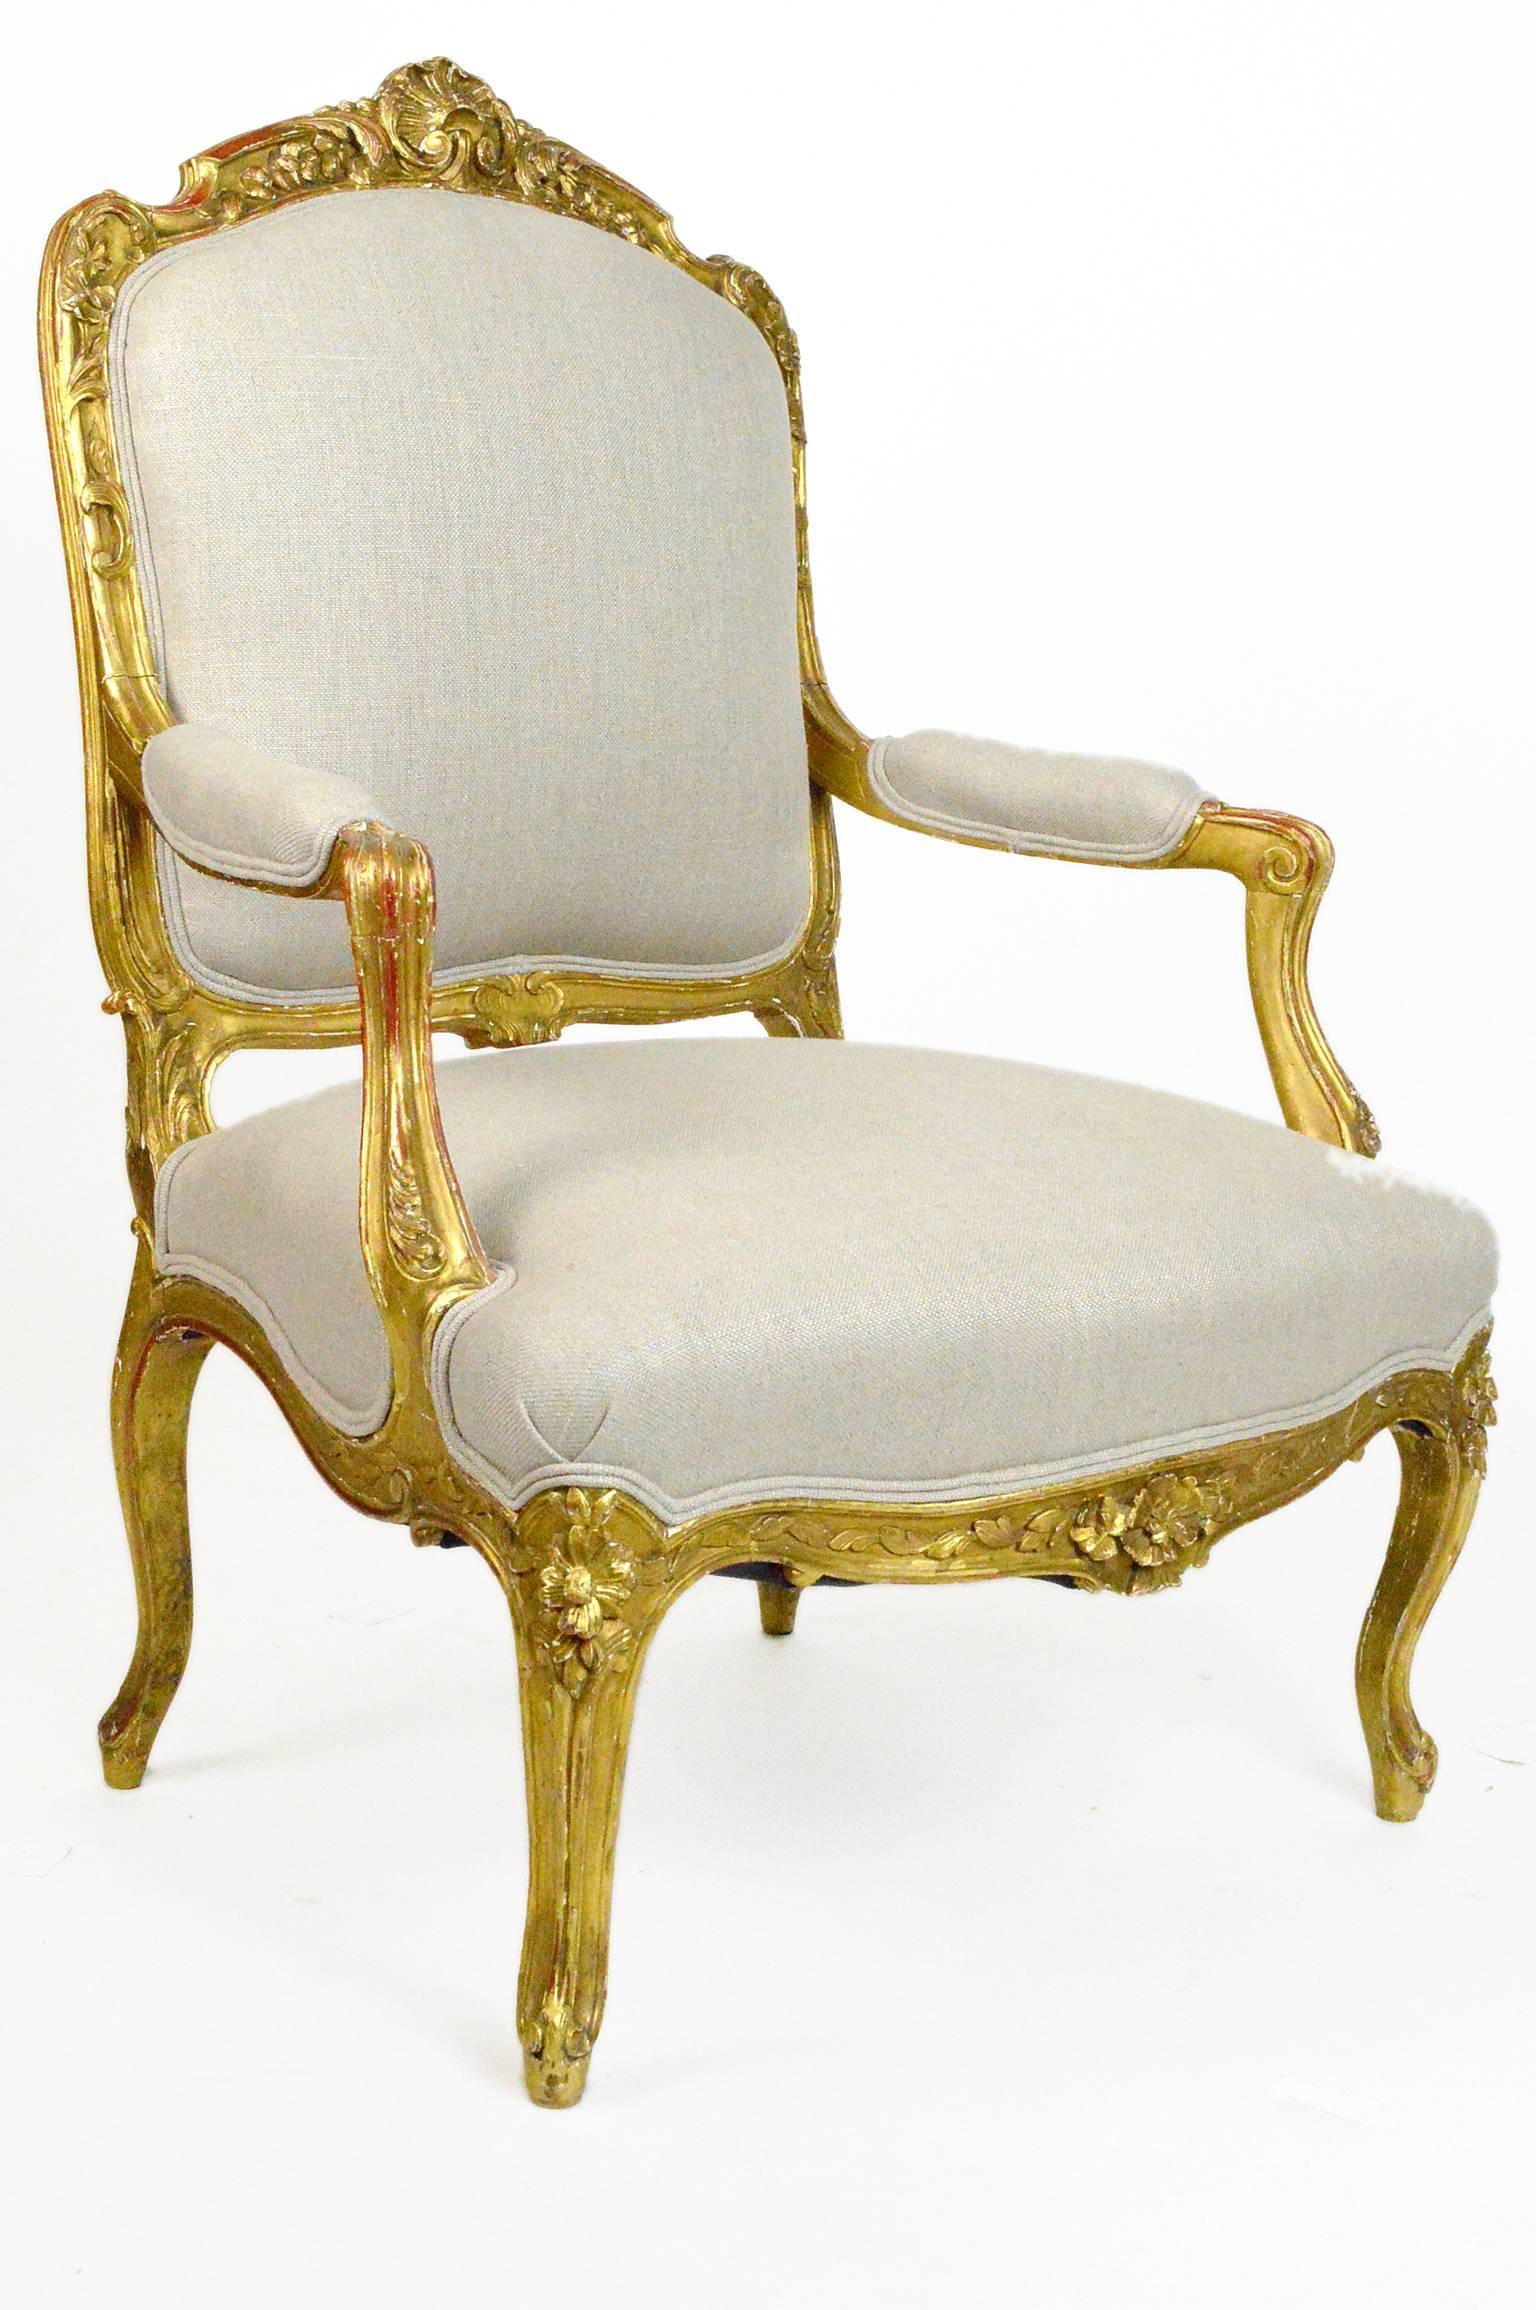 19th century Louis XV style giltwood armchair with elegant hand carving to top, apron, arms and legs. Upholstered in neurtral linen.